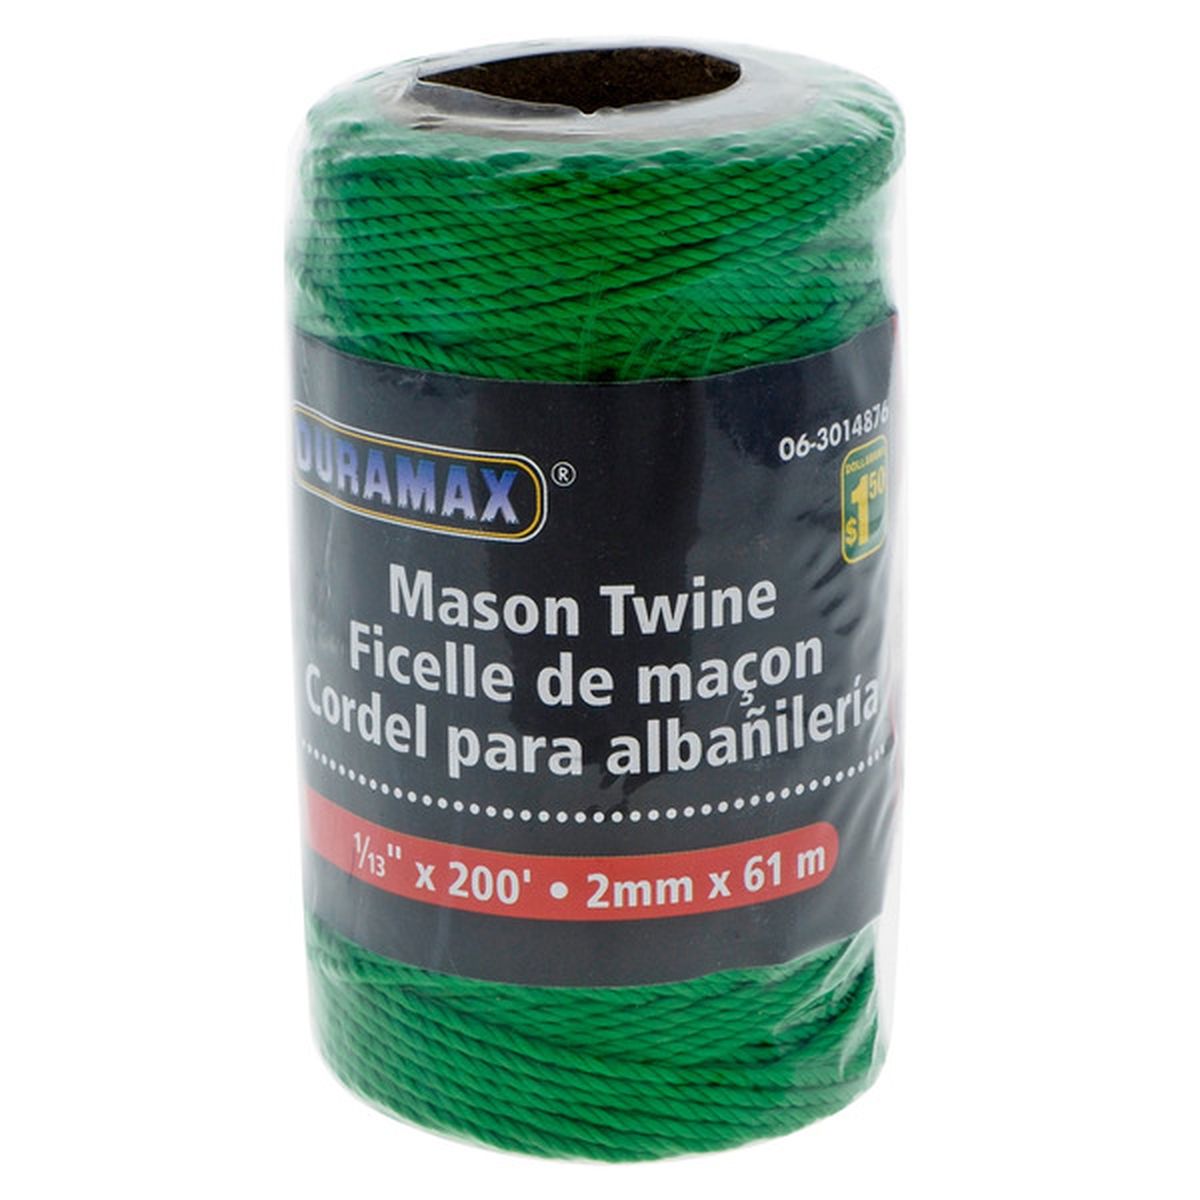 DURAMAX Mason Twine (Assorted Colours) (200 ft) Delivery or Pickup Near Me  - Instacart